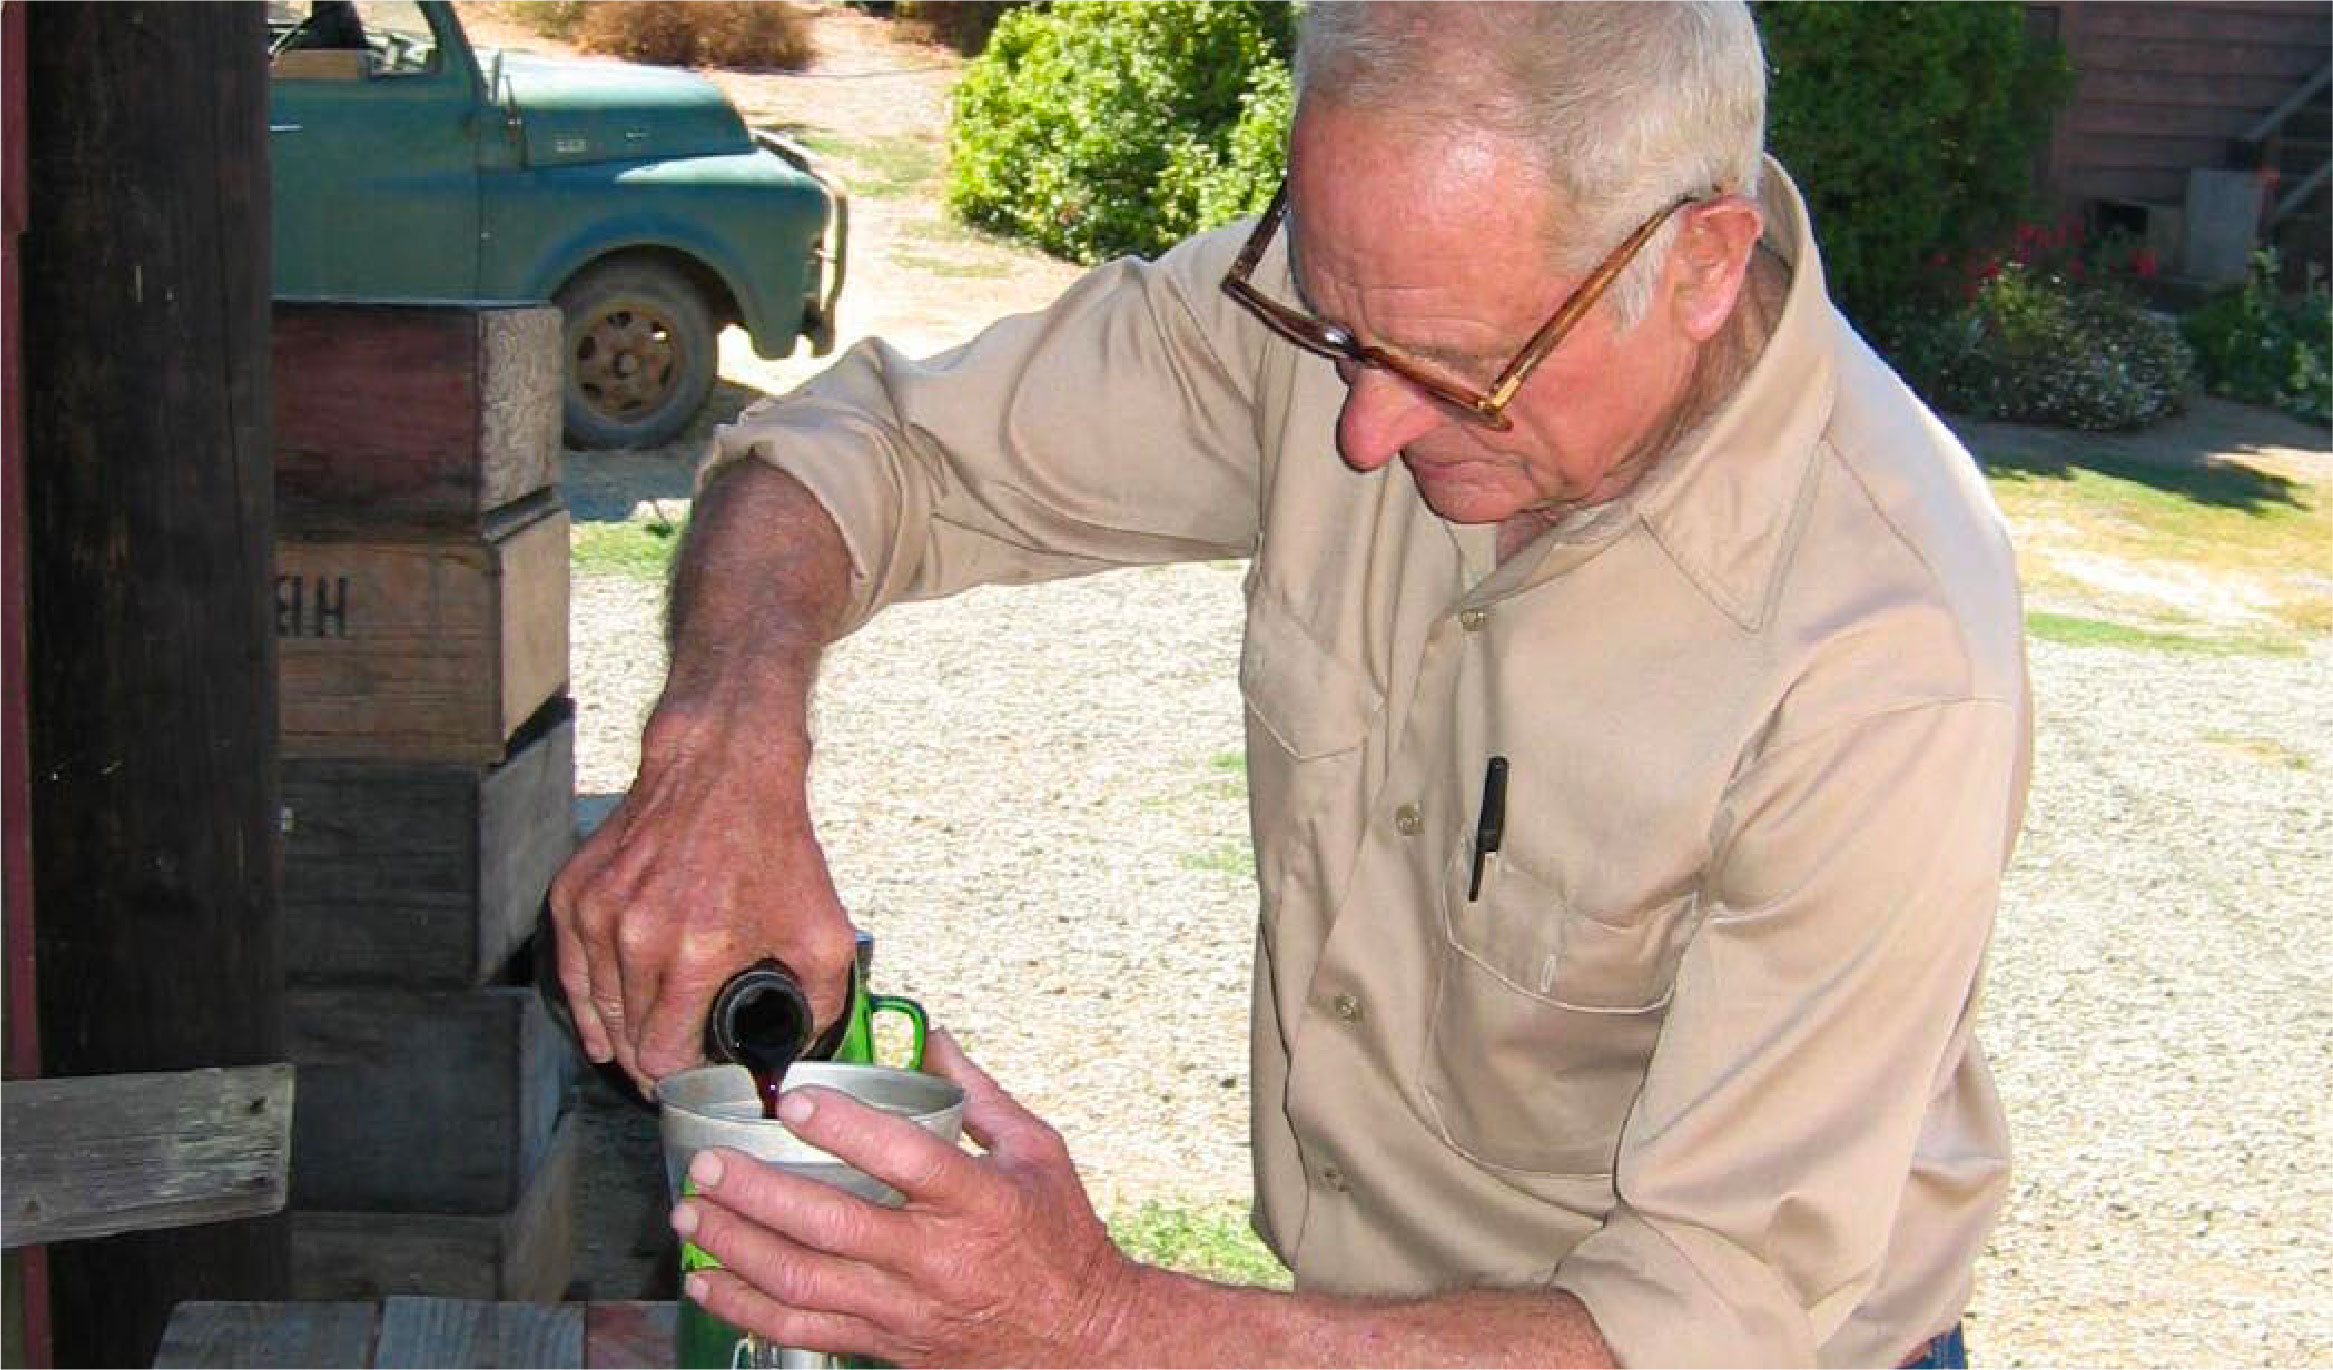 Chester Brandlin pouring his personal collection of family wine crafted from the estate.